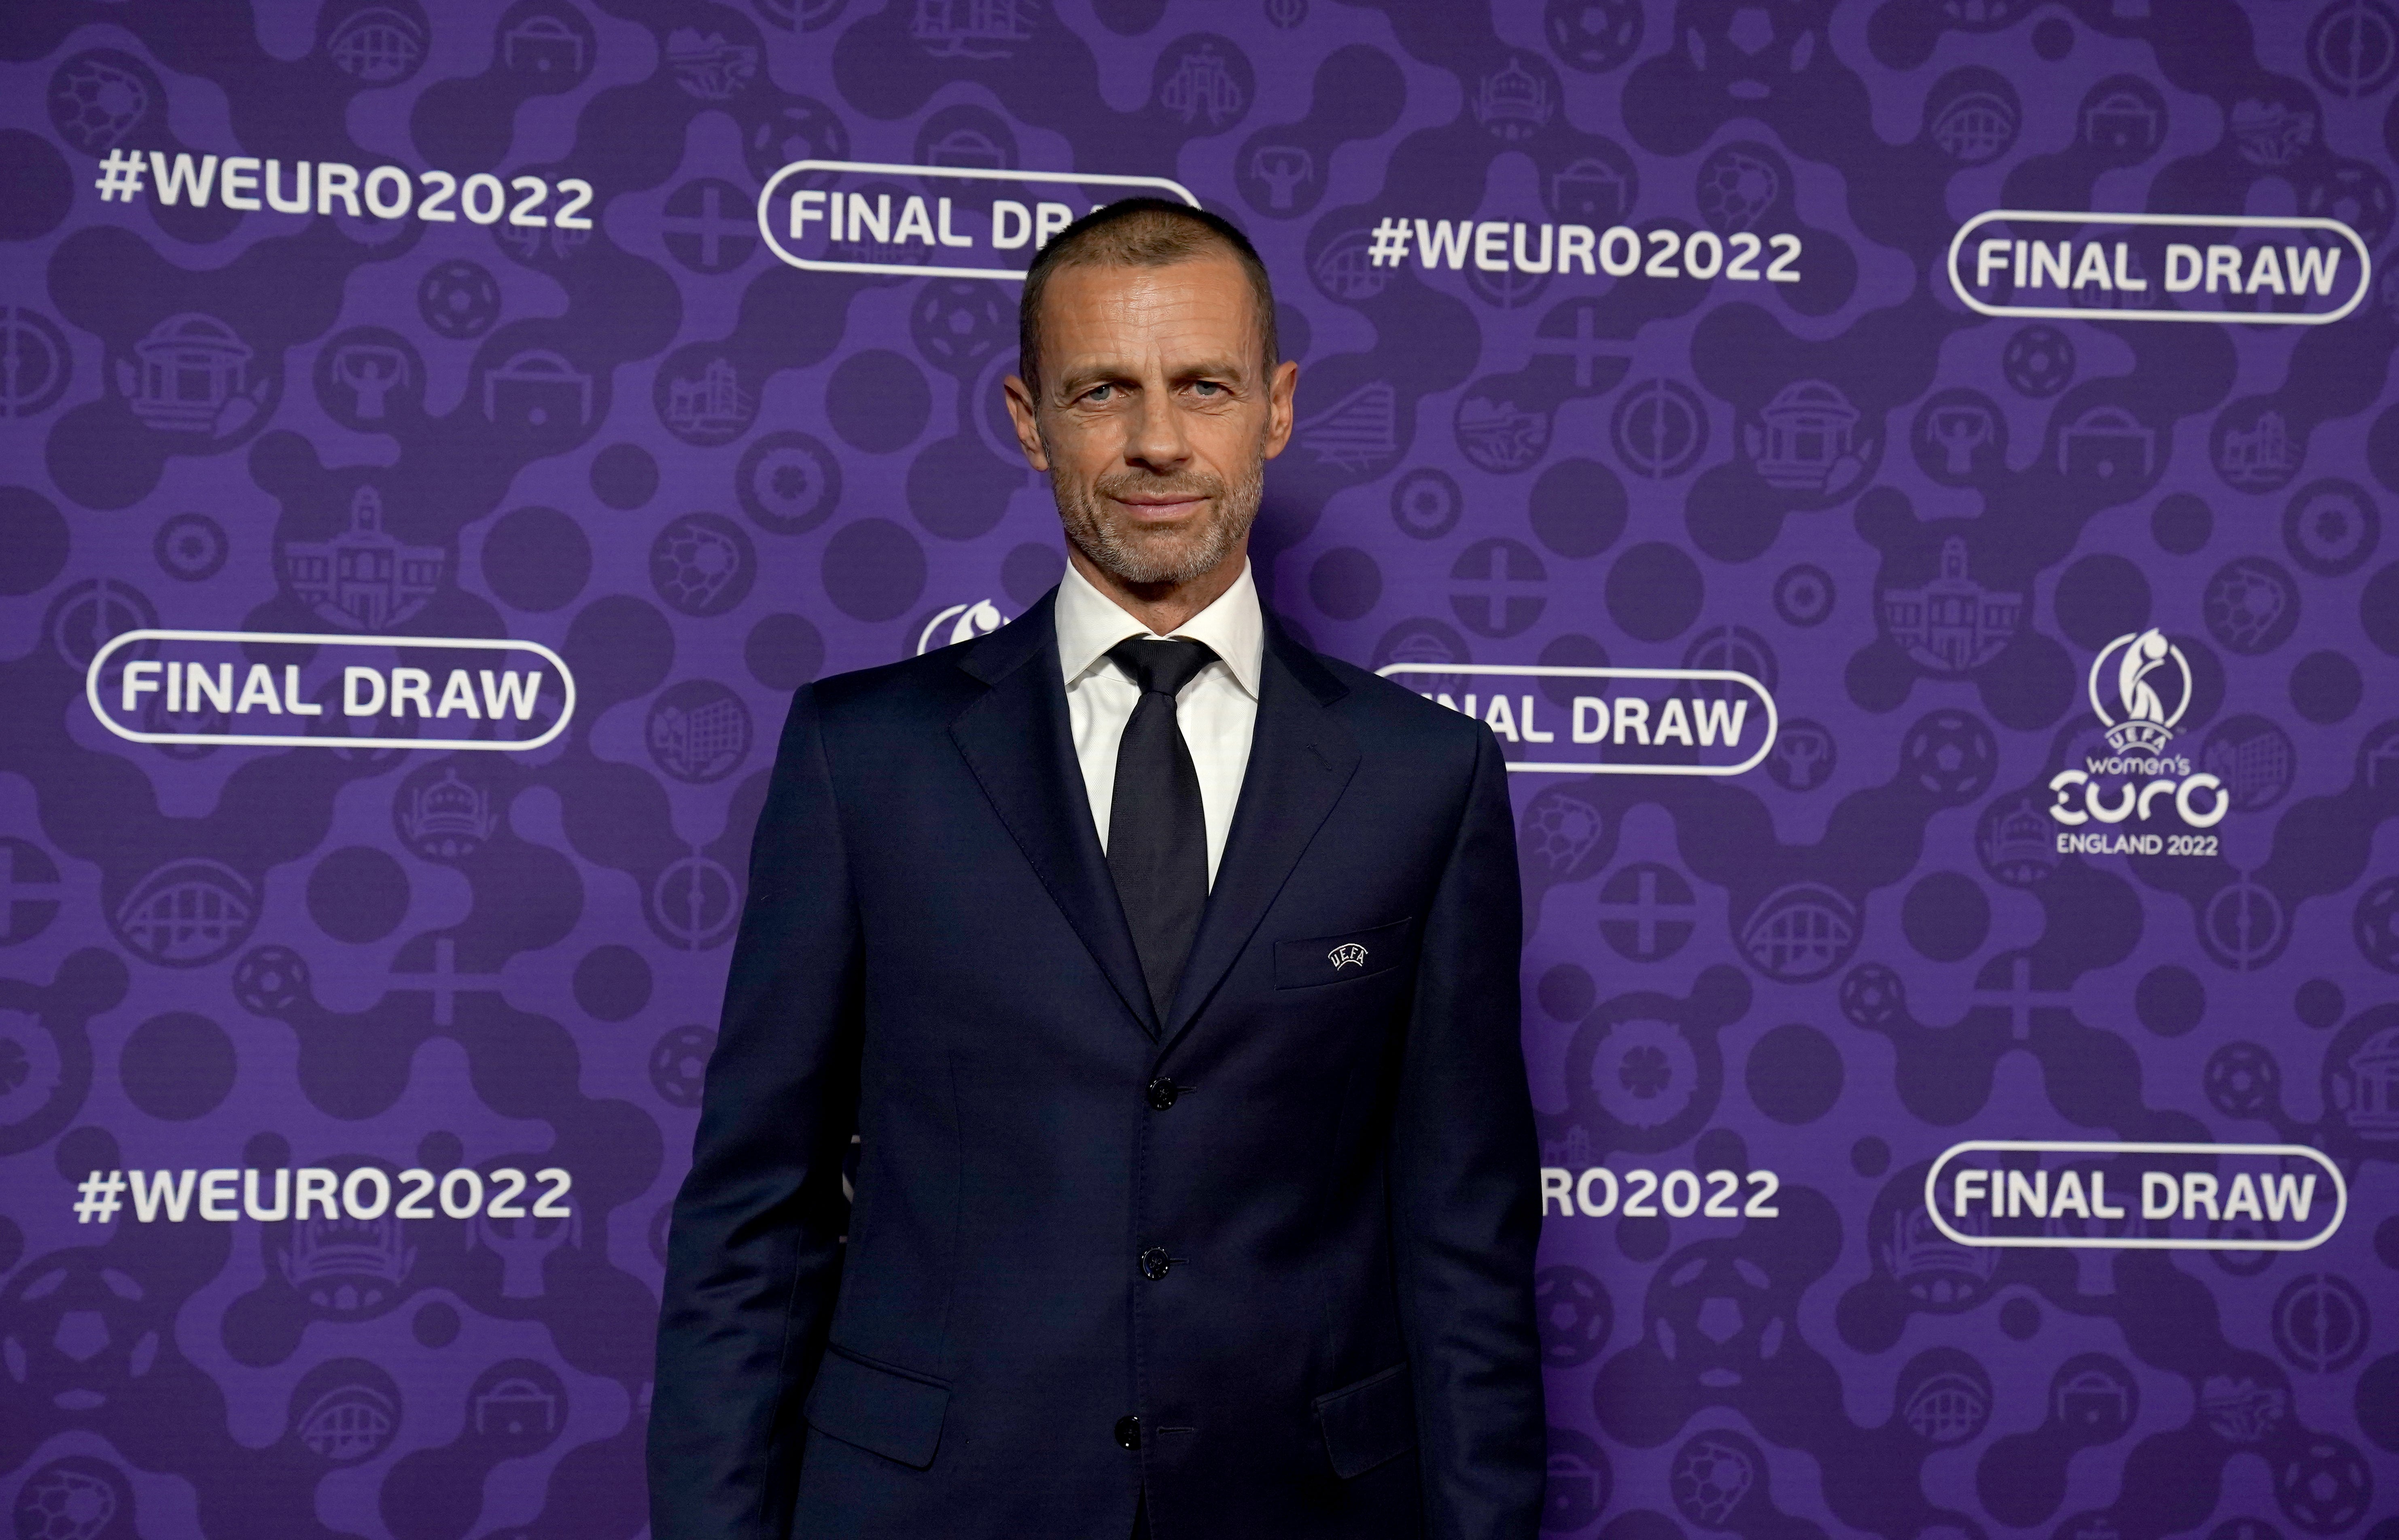 UEFA president Aleksander Ceferin welcomed the resolution from the EU Council (Nick Potts/PA)